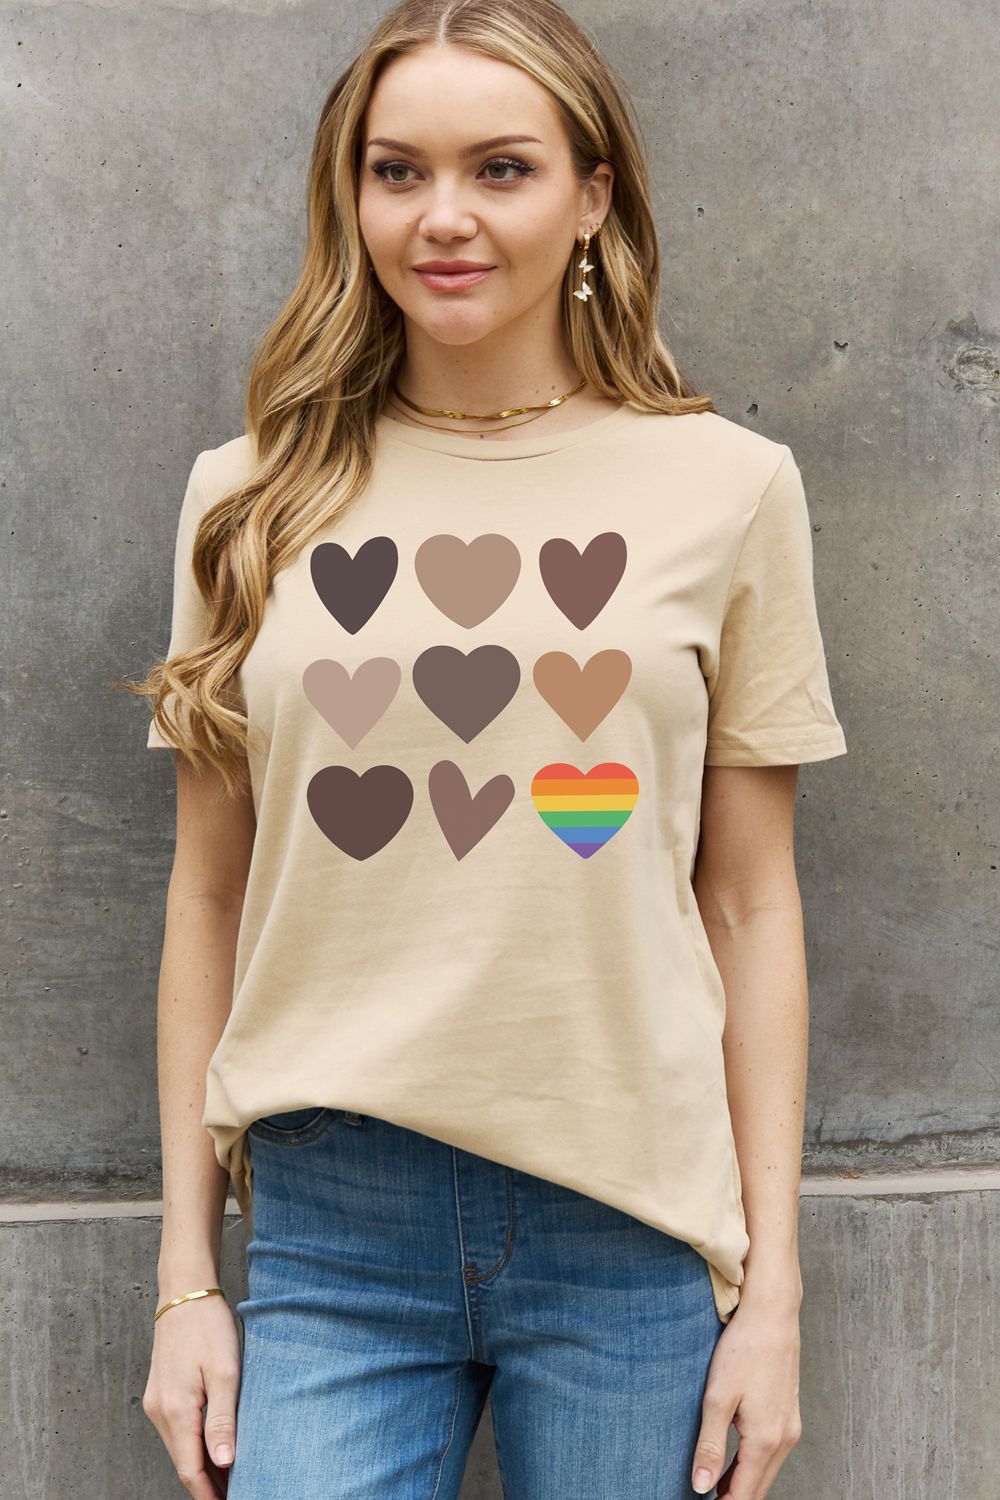 Rosy Brown Simply Love Full Size Heart Graphic Cotton Tee